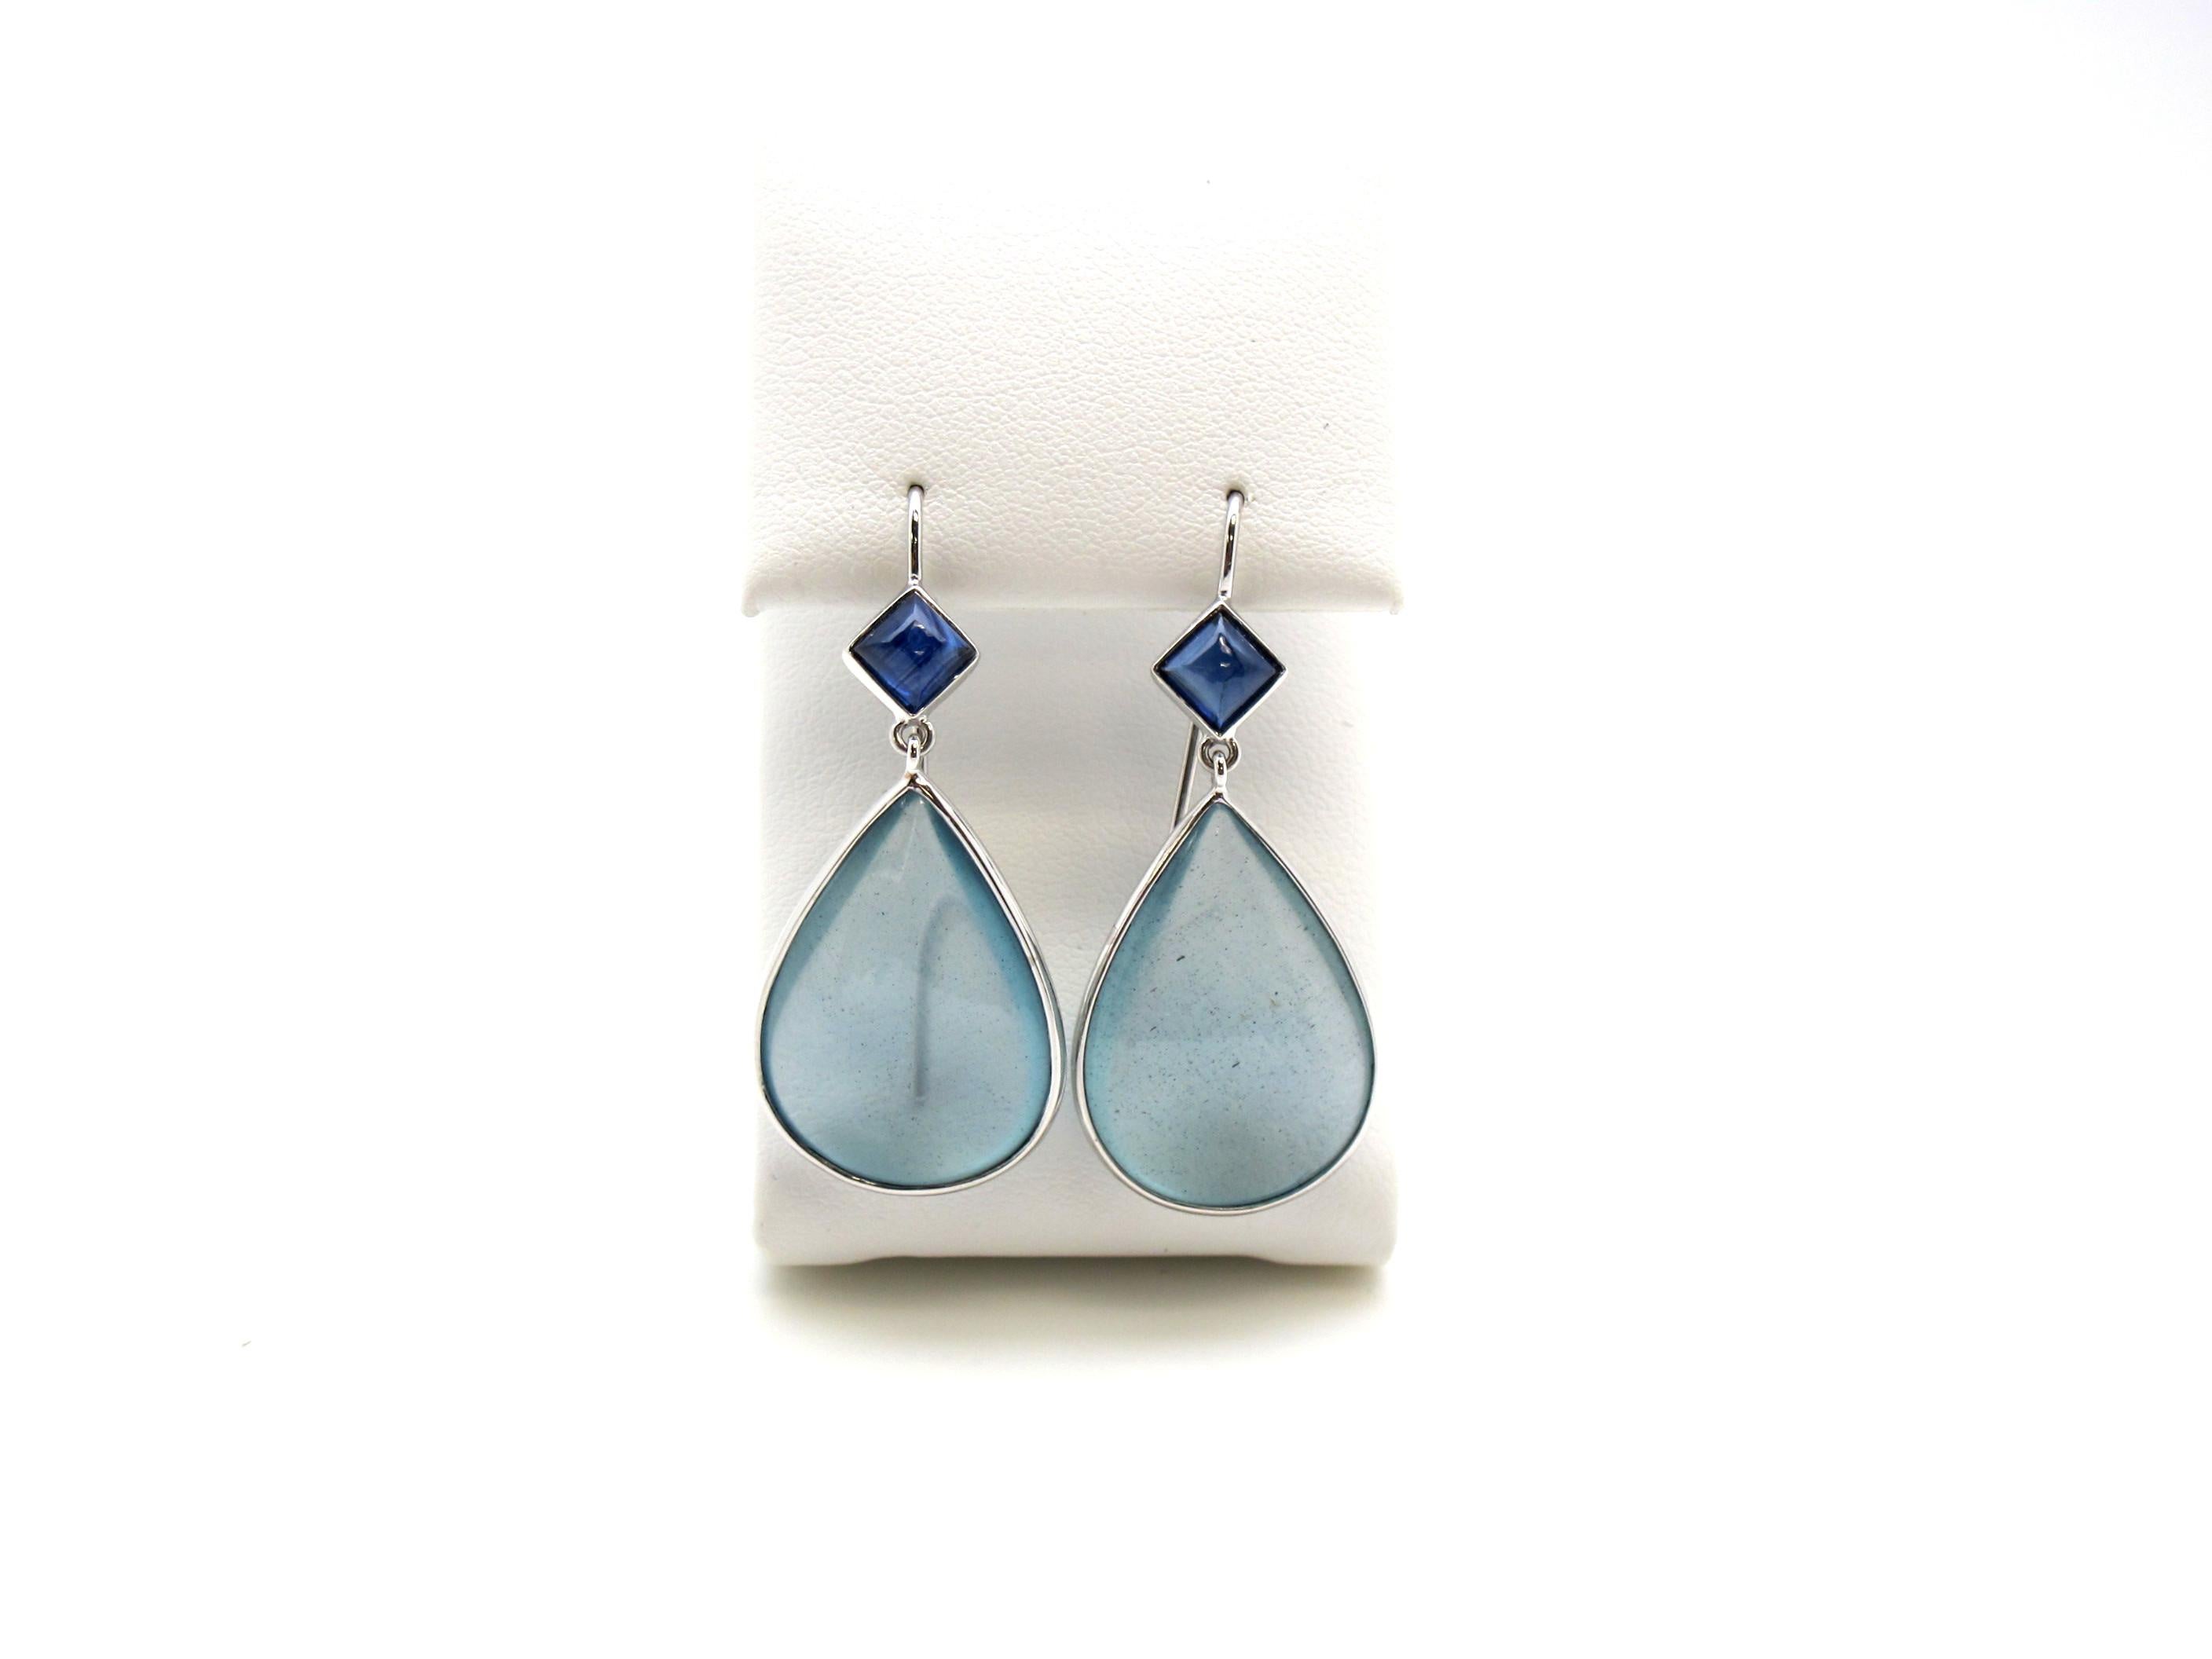 Unusually large aquamarine pendaloques are masterfully paired with blue sapphires to form these beautiful earrings.   The earrings are handmade of 18K white gold, two pear shaped aquamarines (30.26cts/tw) and two princess cut sapphire cabochons